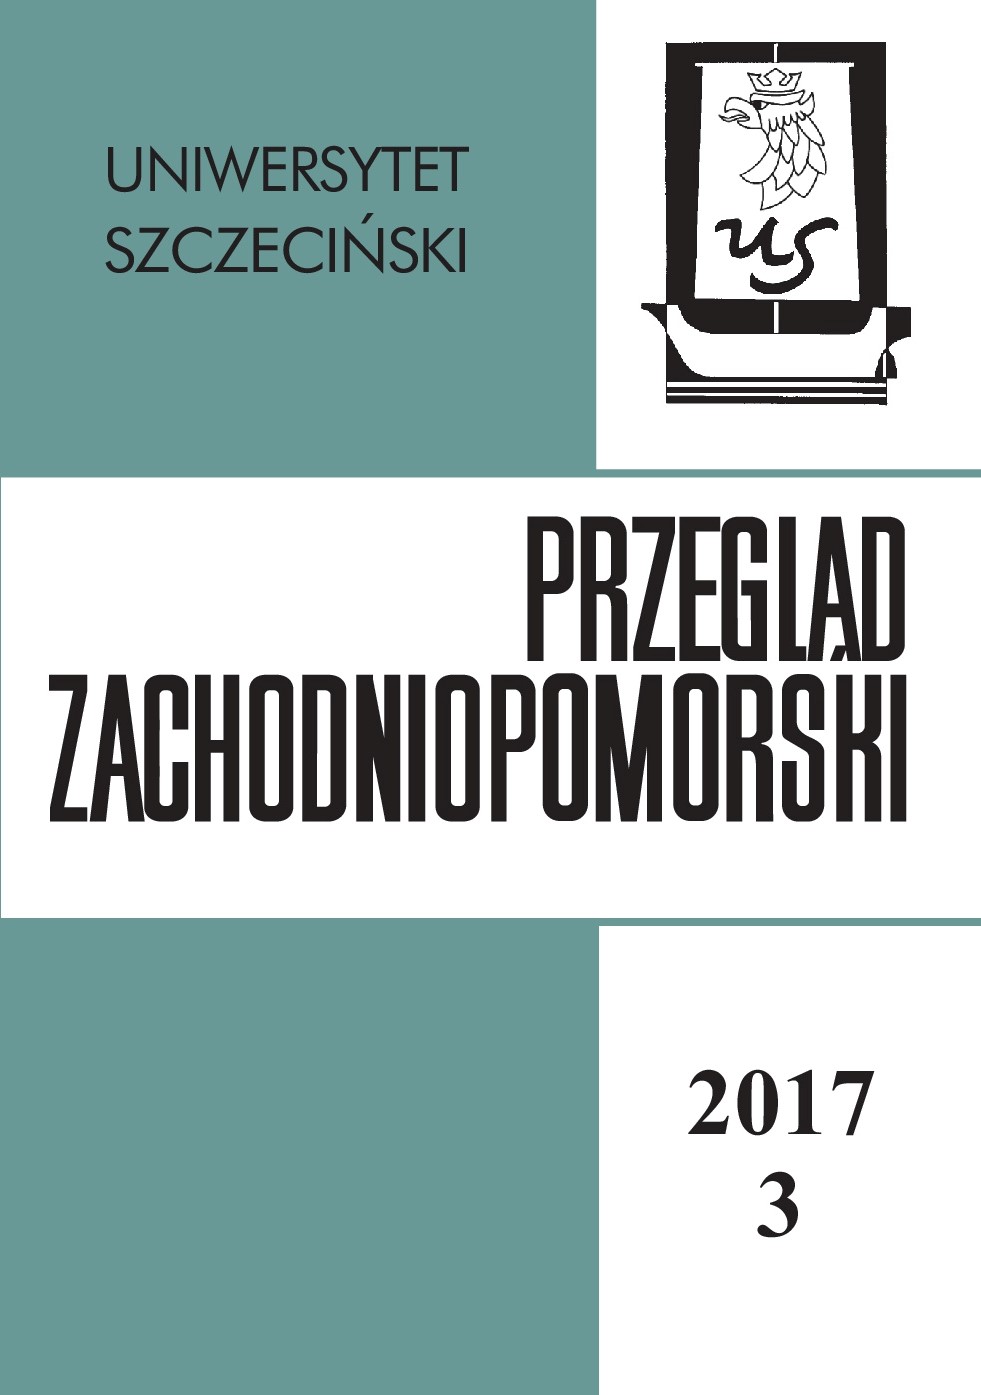 Rural Elementary Schools with Polish/Kashubian
as the languages of instruction in Słupsk Synod from the Reformation to Seven Years’ War. Cover Image